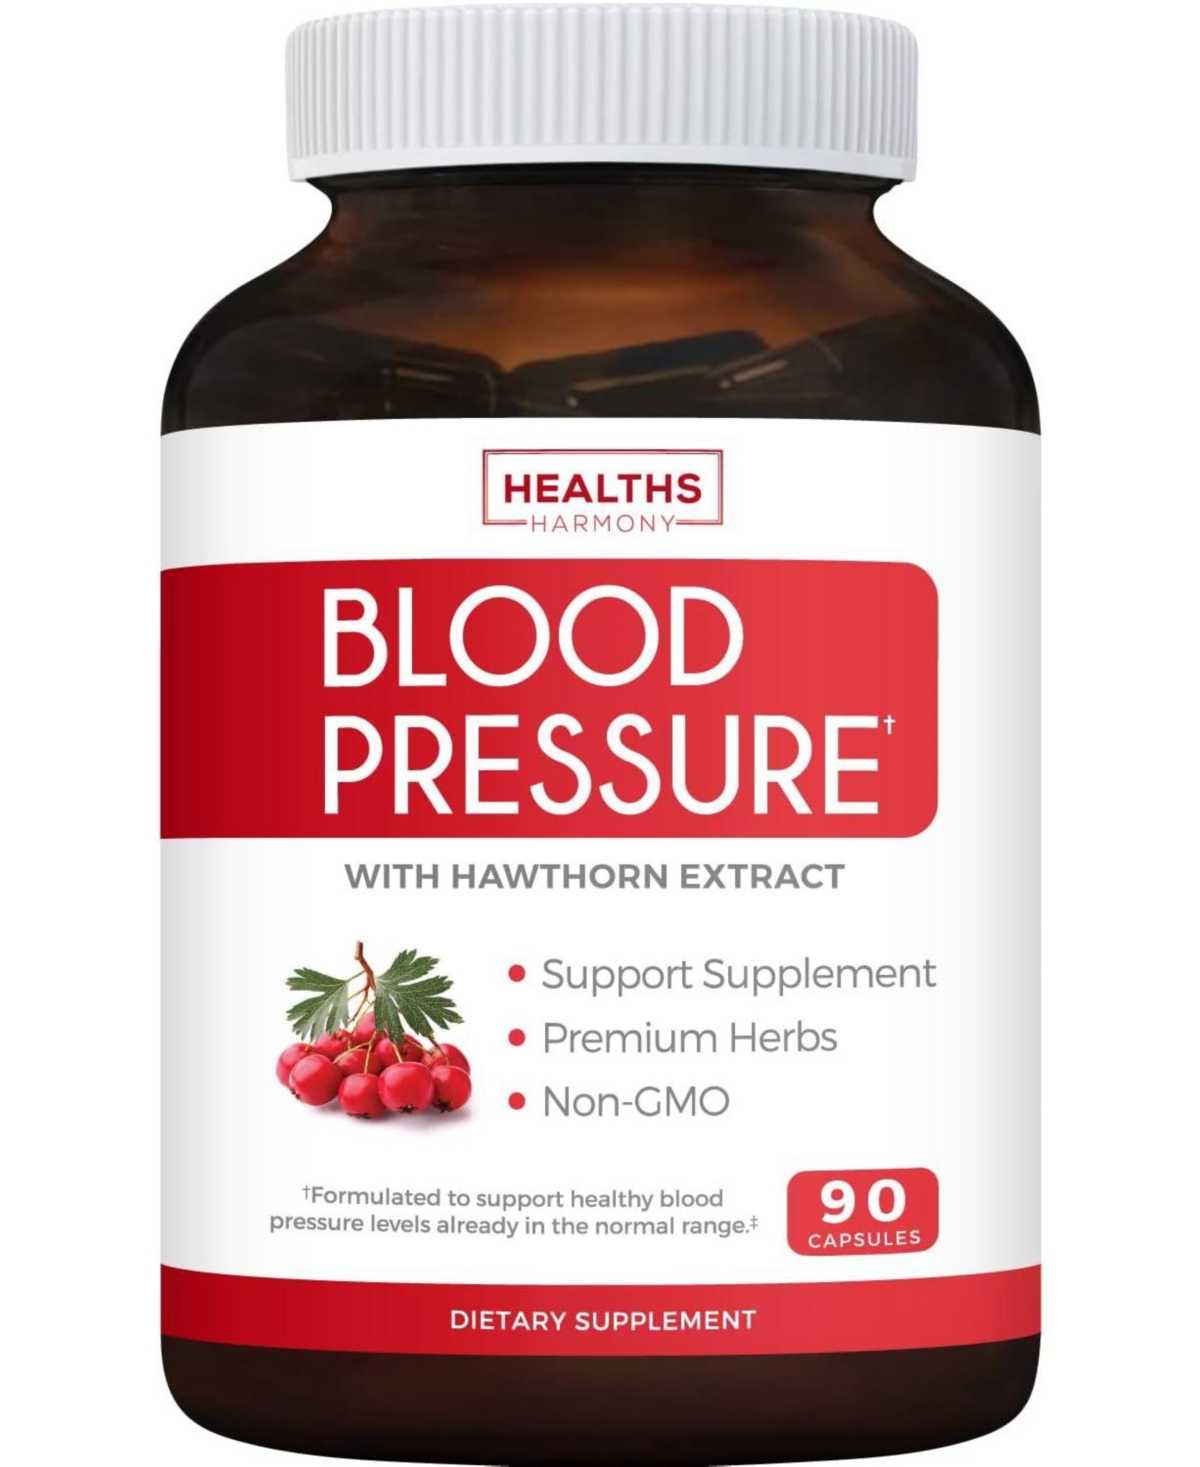 Blood Pressure Support Supplement Non-gmo Premium Natural Herbs, Vitamins & Berries - High Dosage of Hawthorn Berry Extract â Suppor